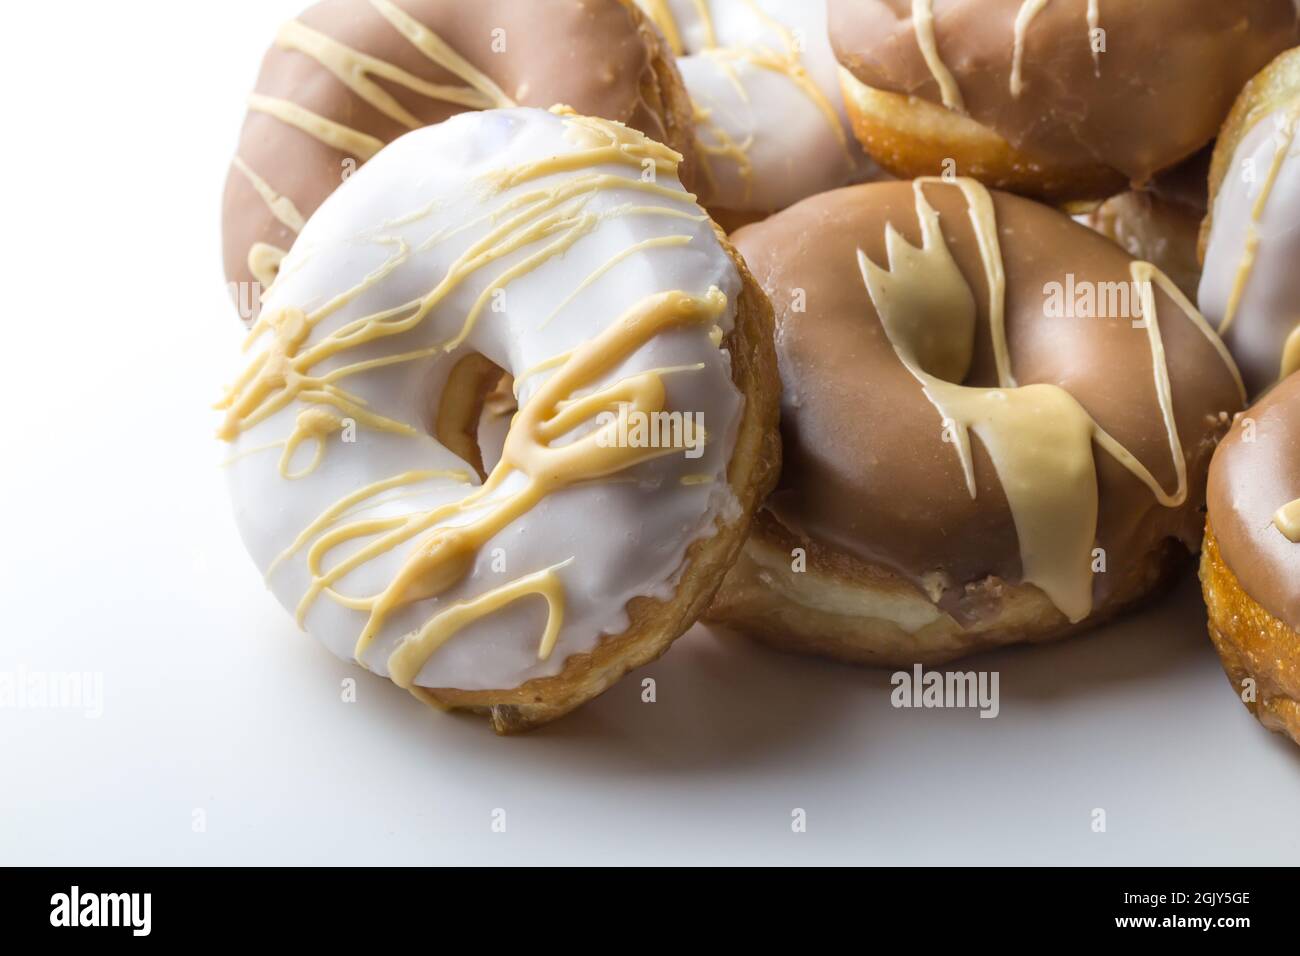 Delicious dougnuts stack with chocolate, caramel and white frosting isolated on white background with space for text Stock Photo